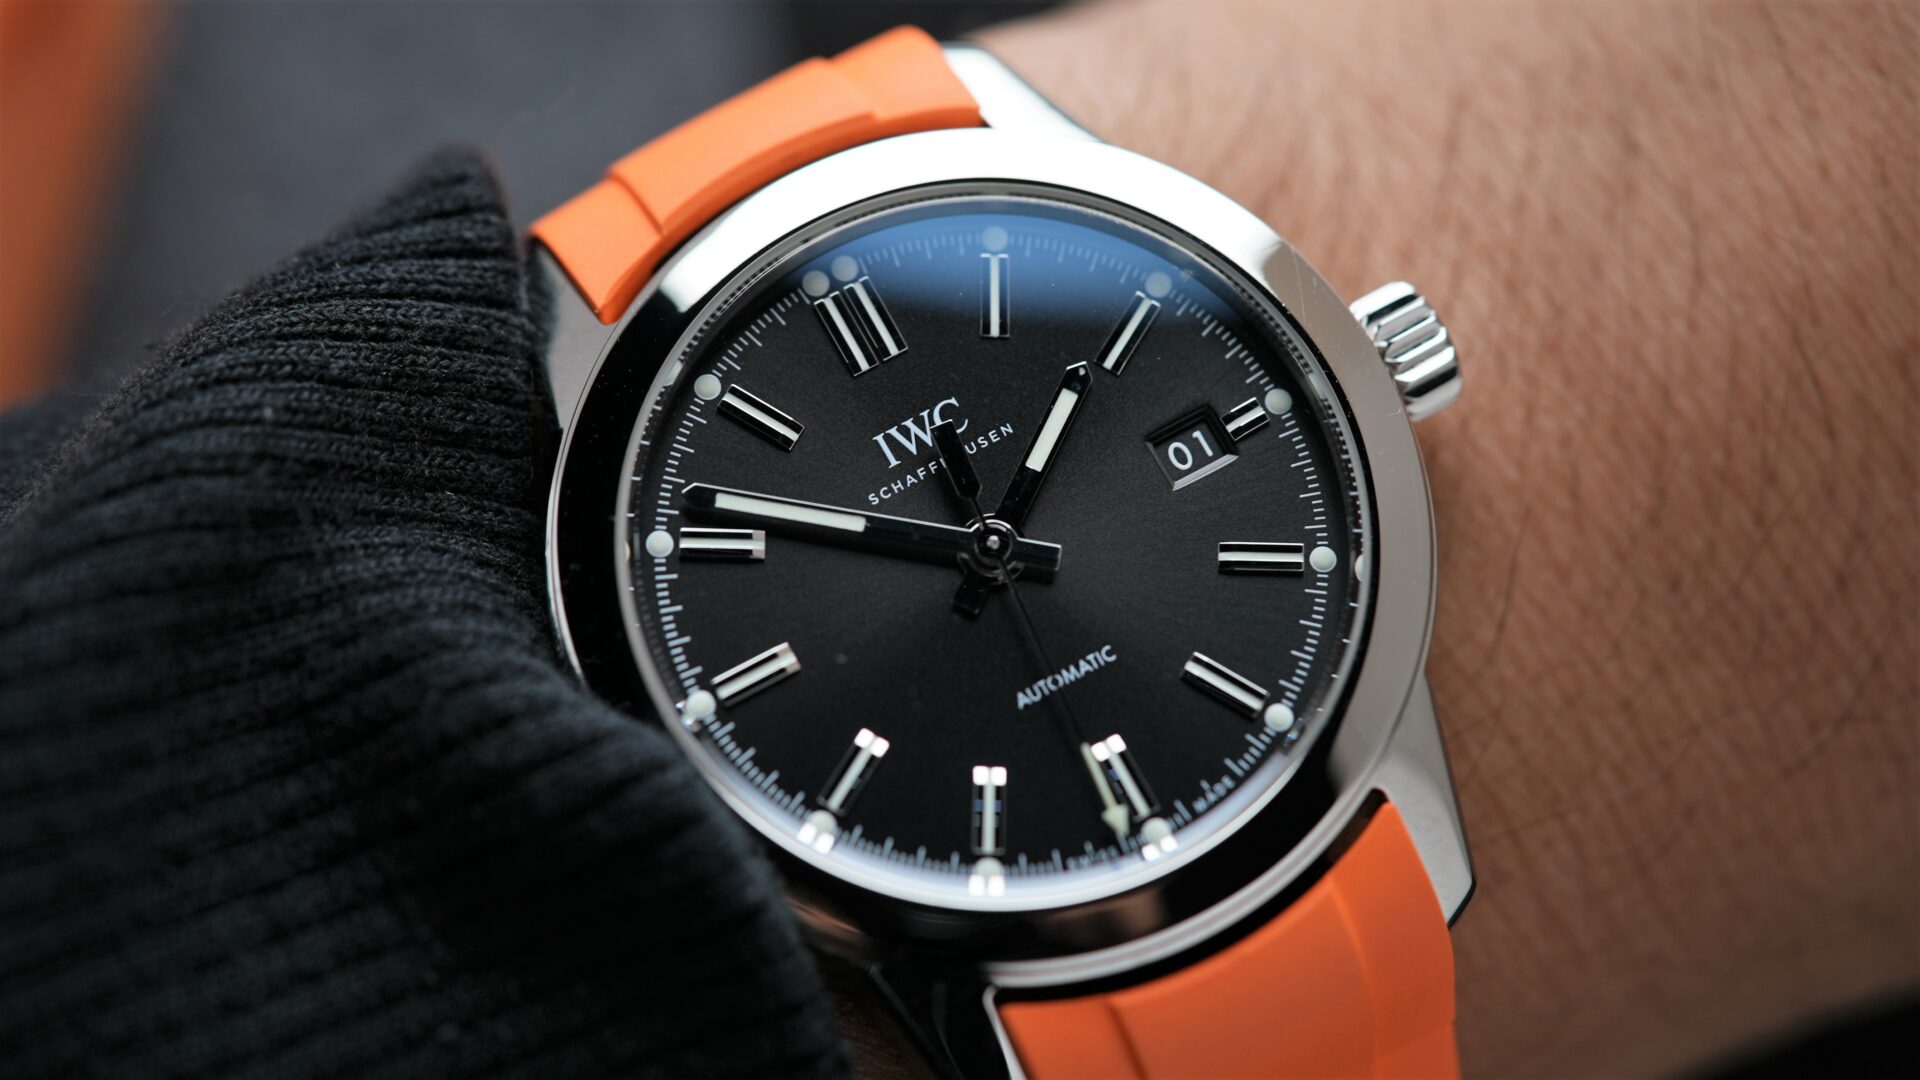 IWC Ingenieur Automatic 40MM 2021 On Bracelet & Extra Orange Rubber watch IW357002 featured on the wrist.